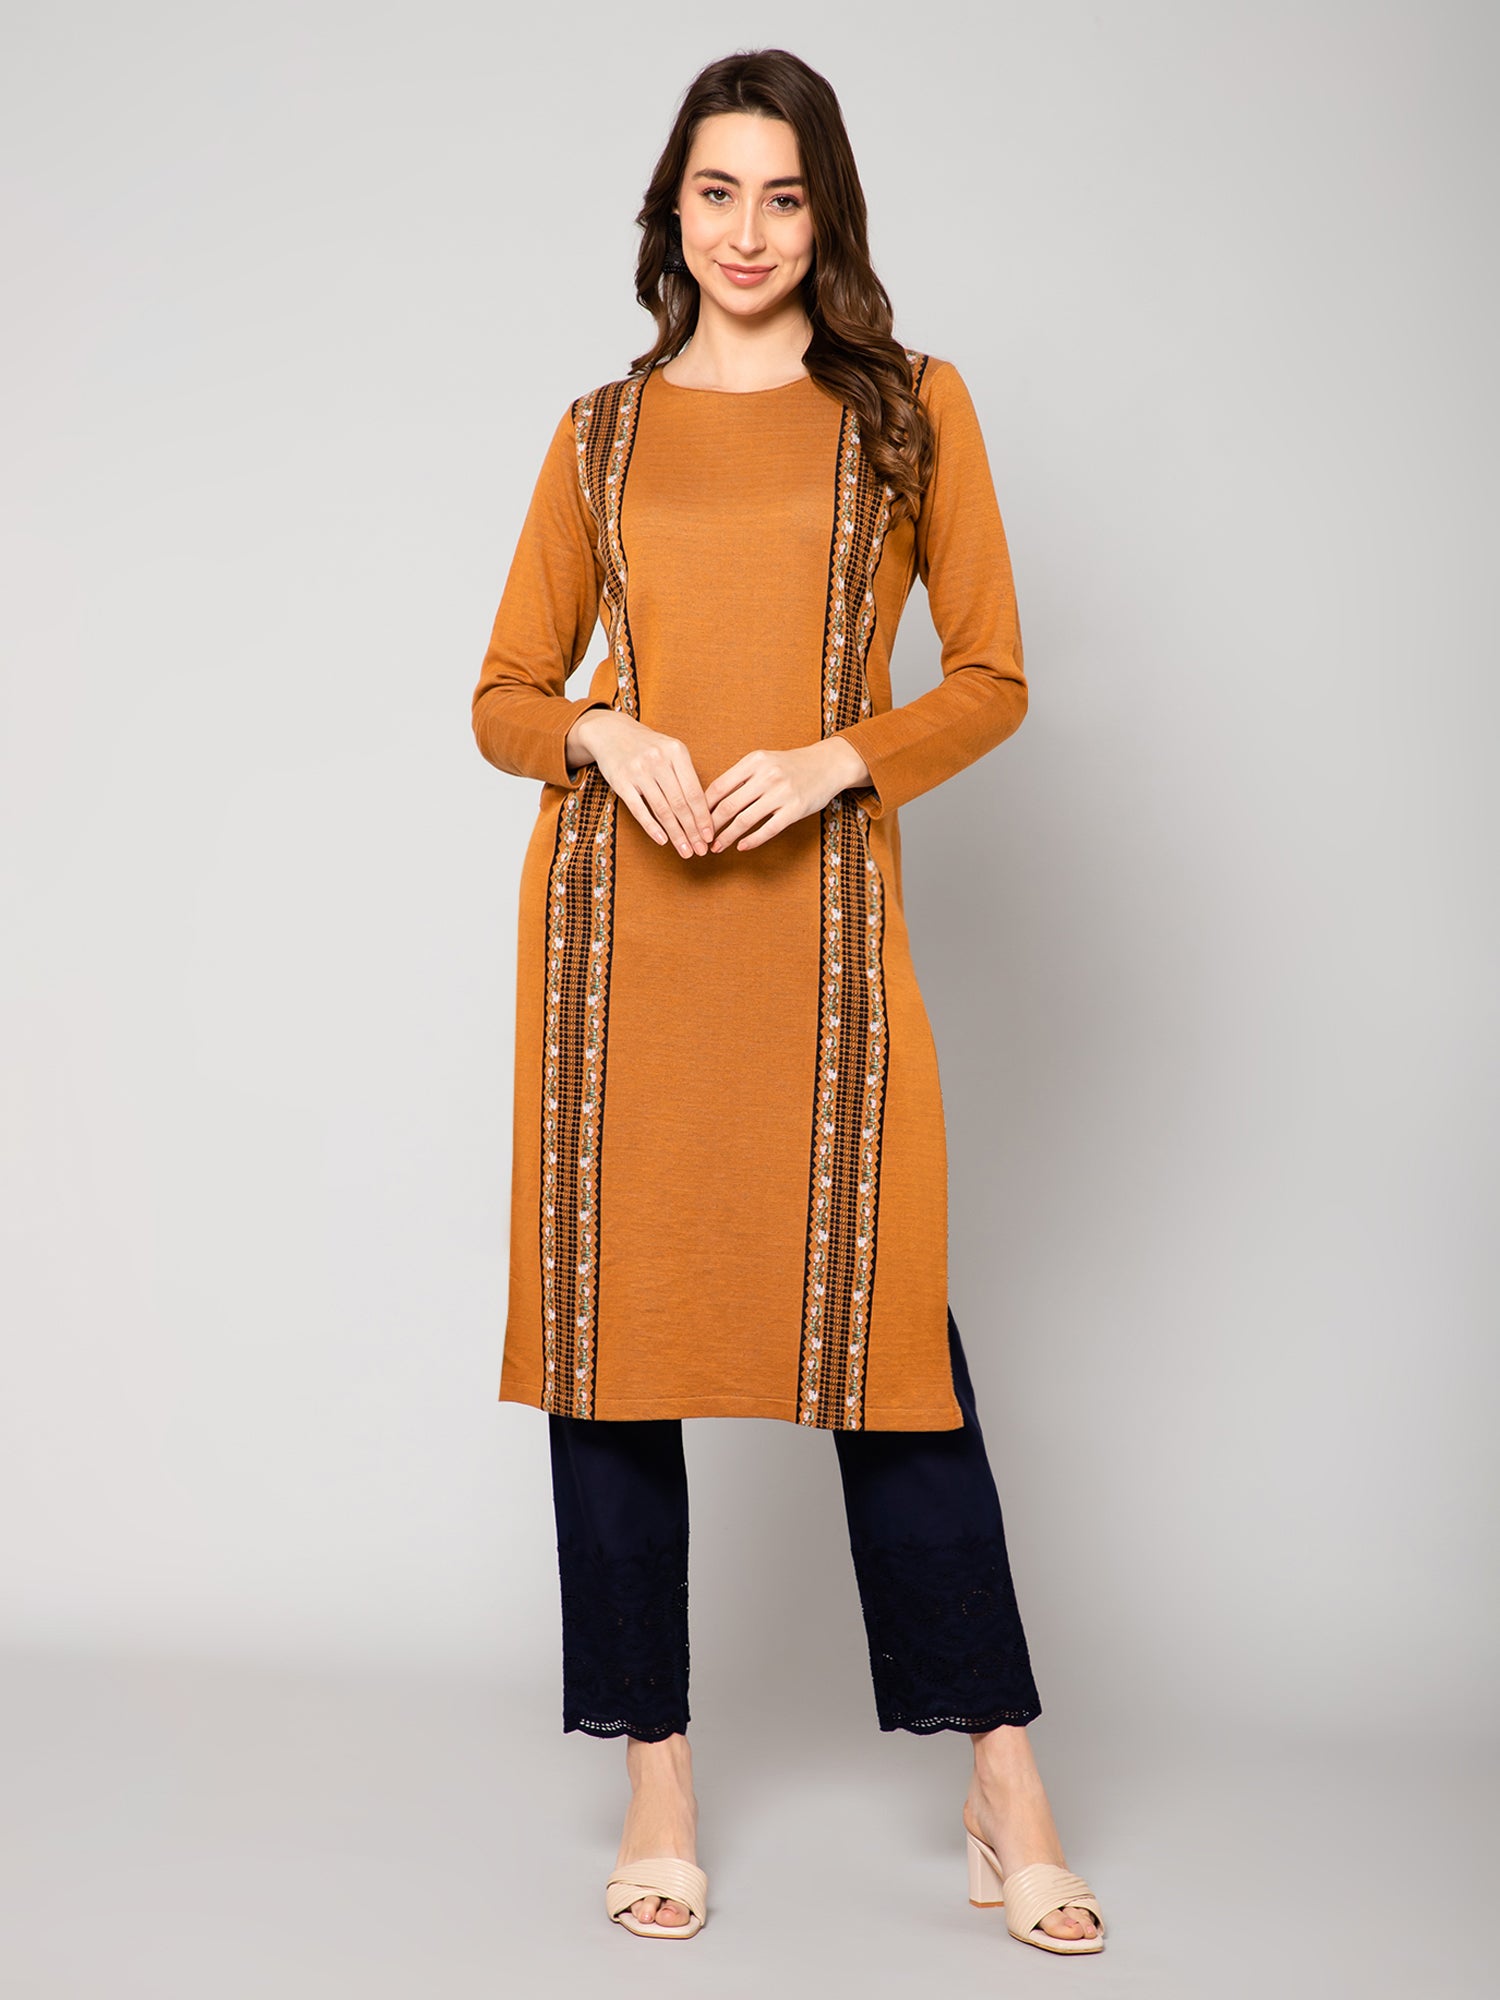 Buy Rust Brown Solid Dress Online - W for Woman